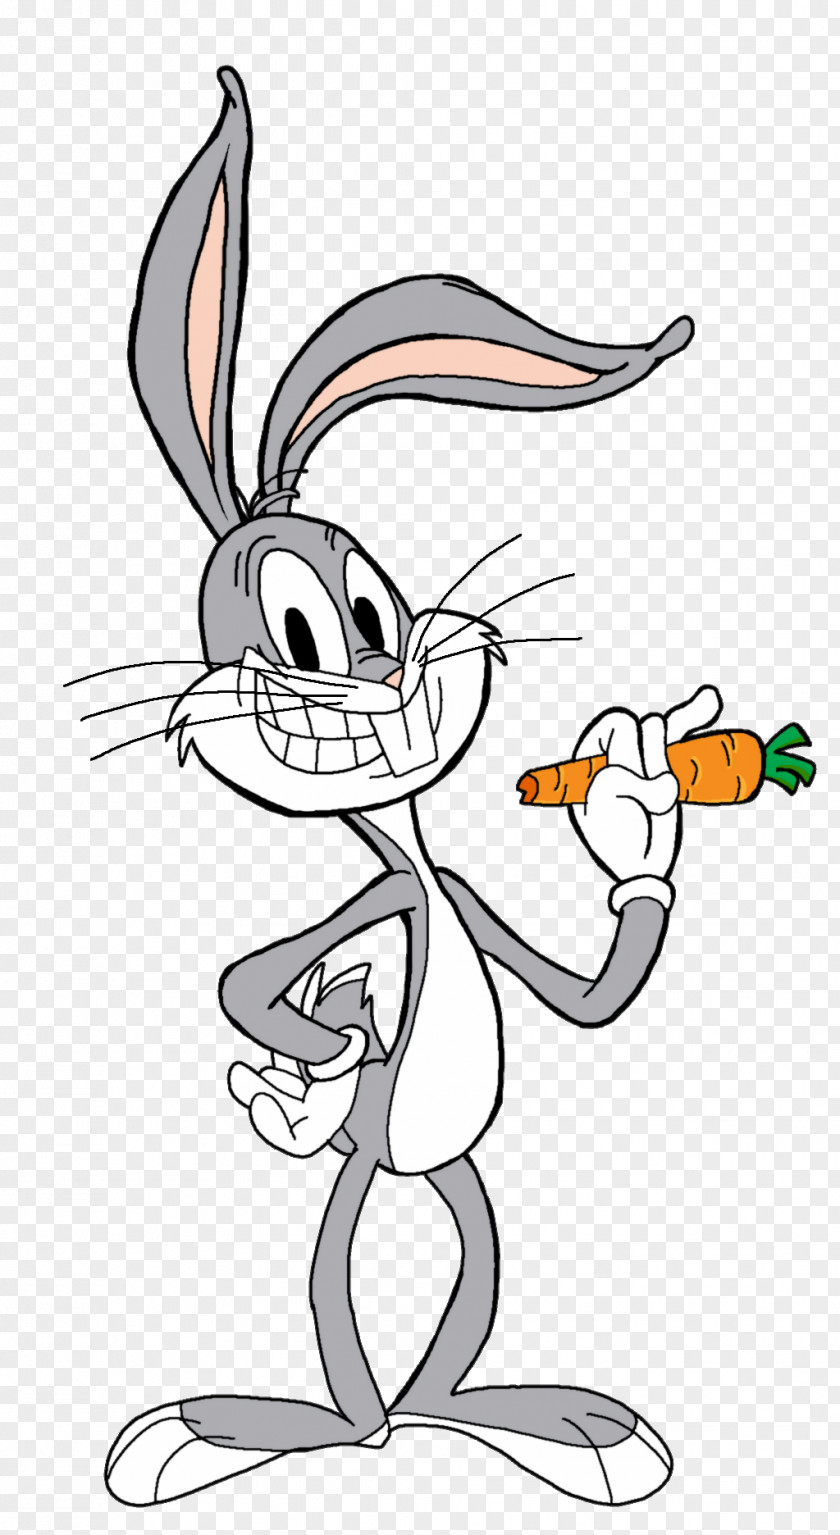 Bugs Bunny Hare Domestic Rabbit Wiki PNG